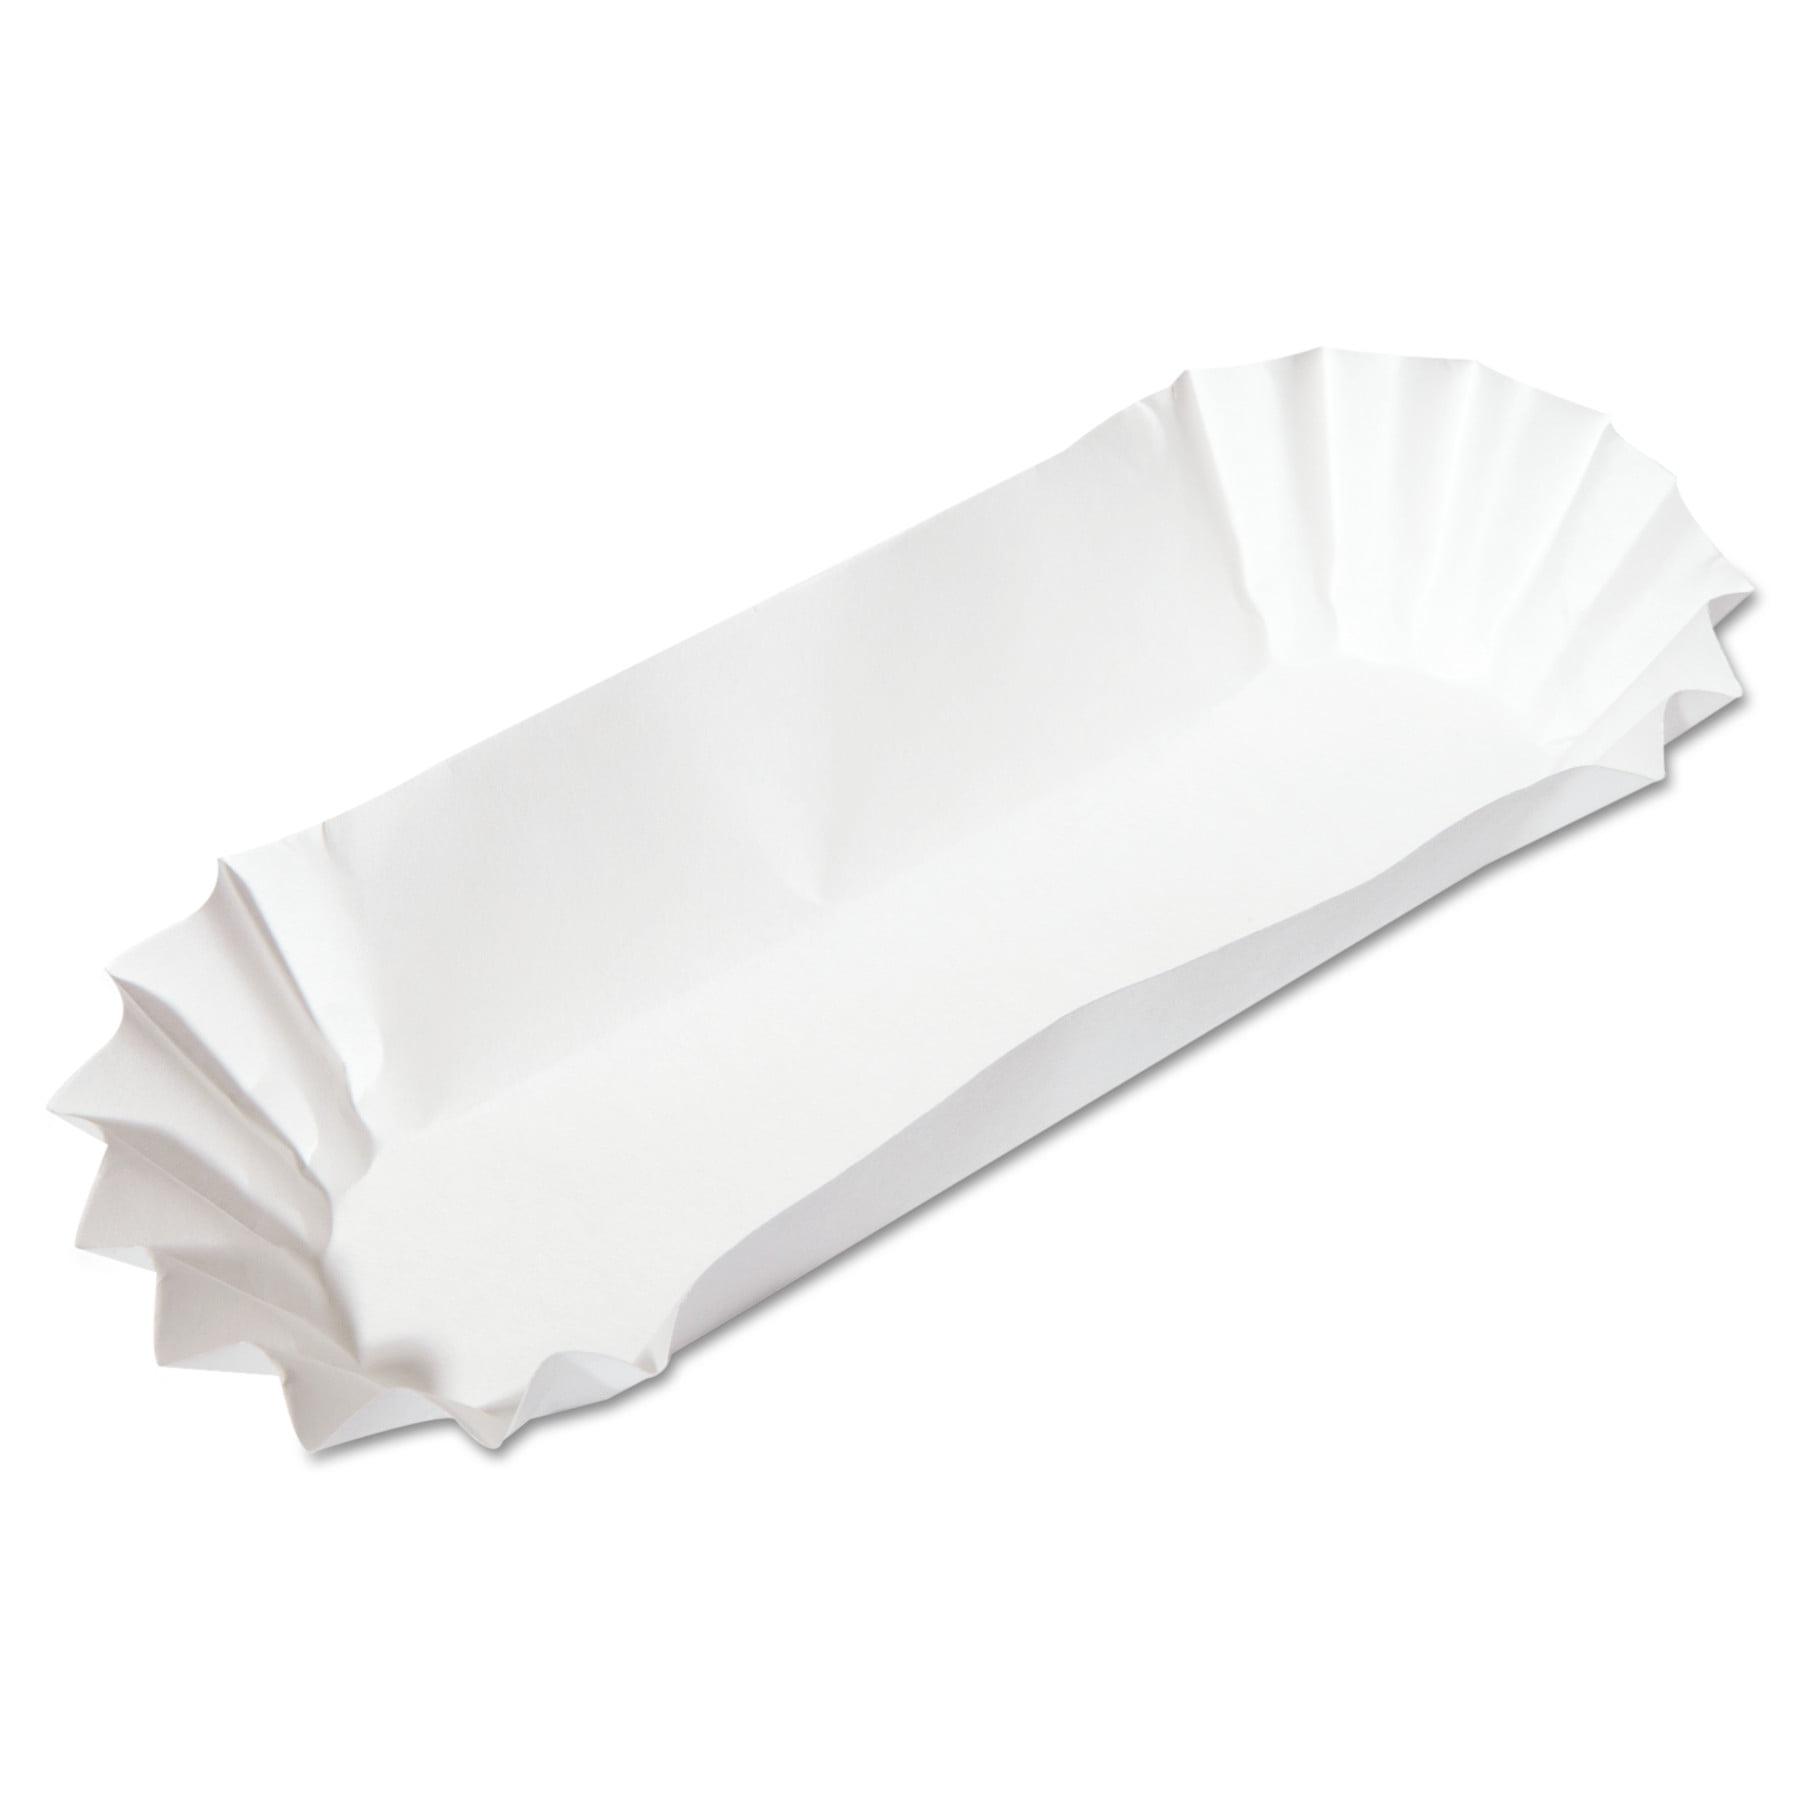 HOFFMASTER HOT DOG TRAYS 8" WHITE FLUTED PAPER SCHOOLS/VENDING USA MADE 100 